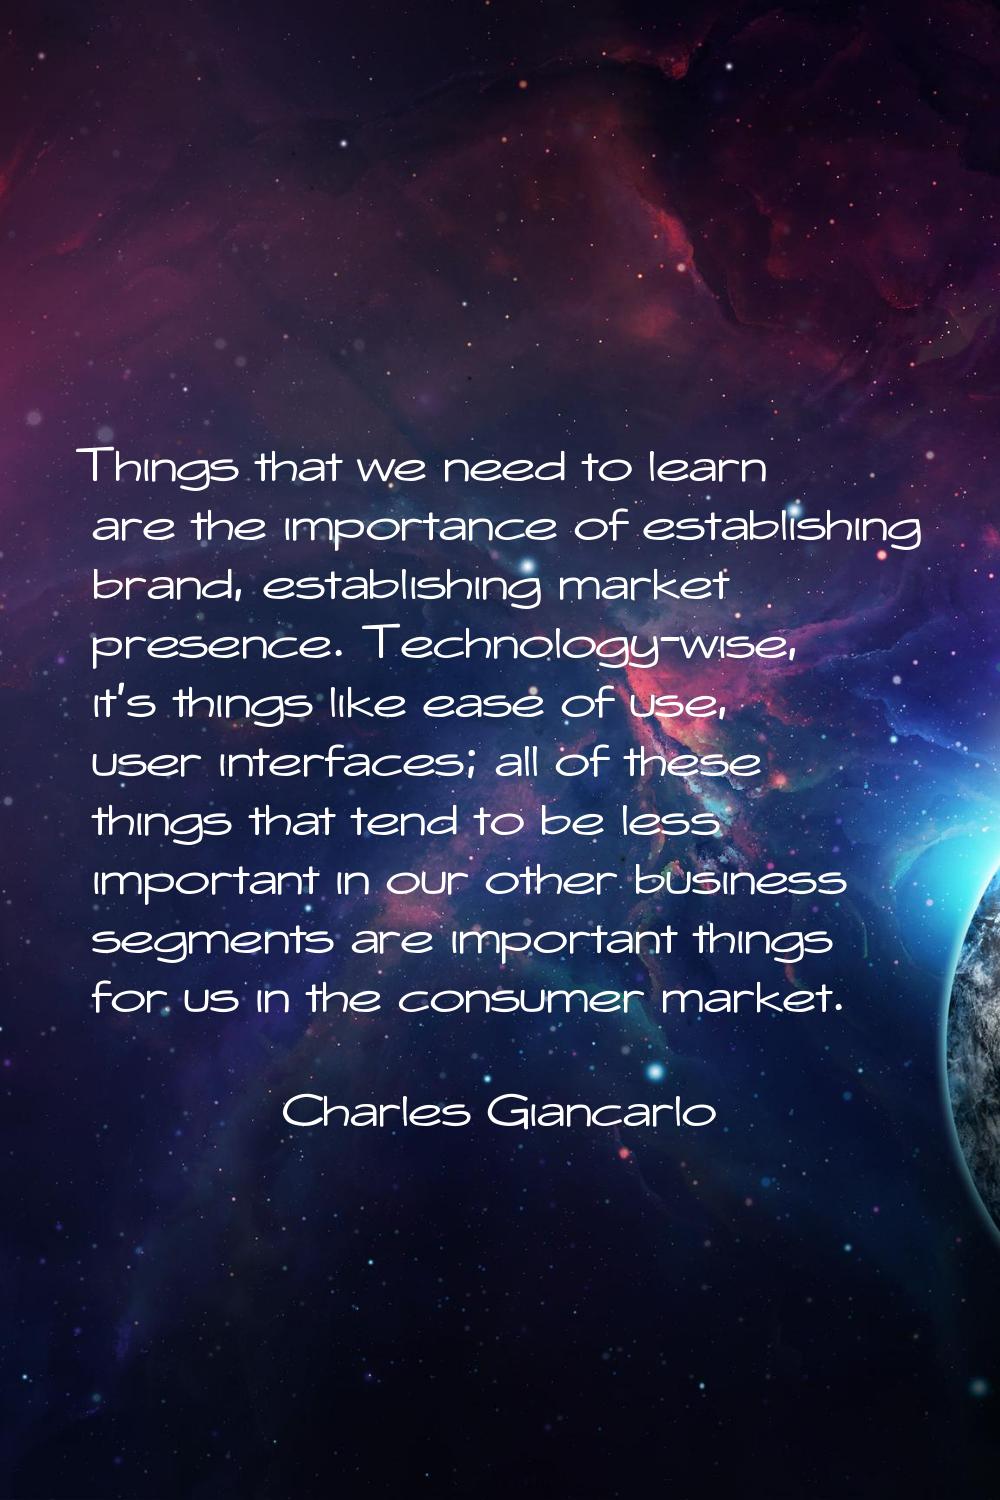 Things that we need to learn are the importance of establishing brand, establishing market presence